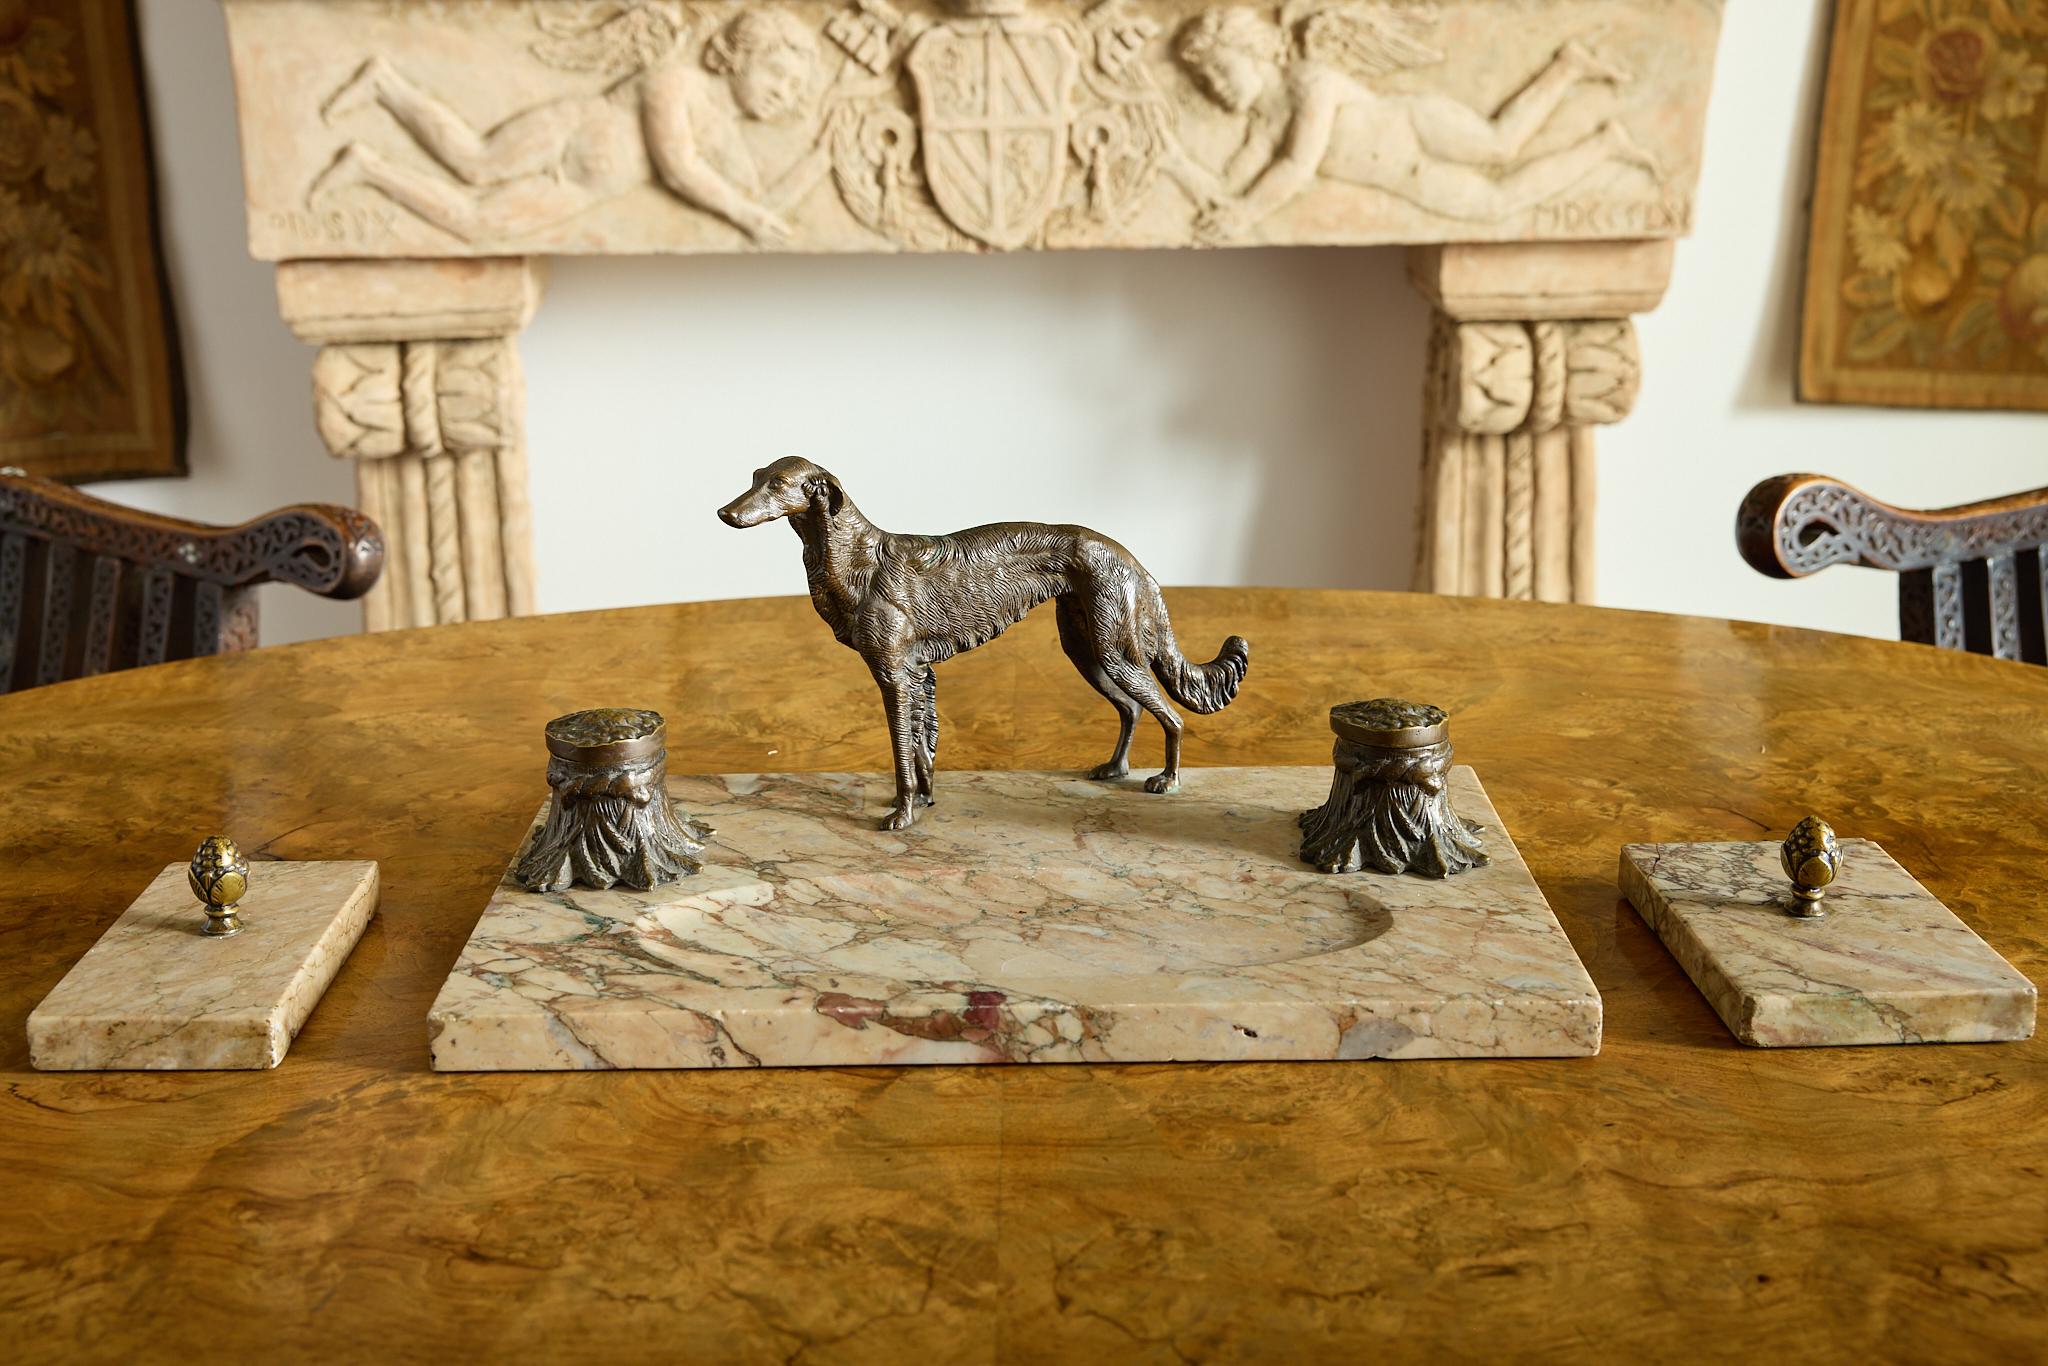 A beautiful, late 19th, early 20th century ink stand. The bronze ink pots are modelled as tree trunks mounted on a marble base with a finely modelled bronze figure of a dog in the centre. 
The set includes two marble paper weights with bronze, acorn